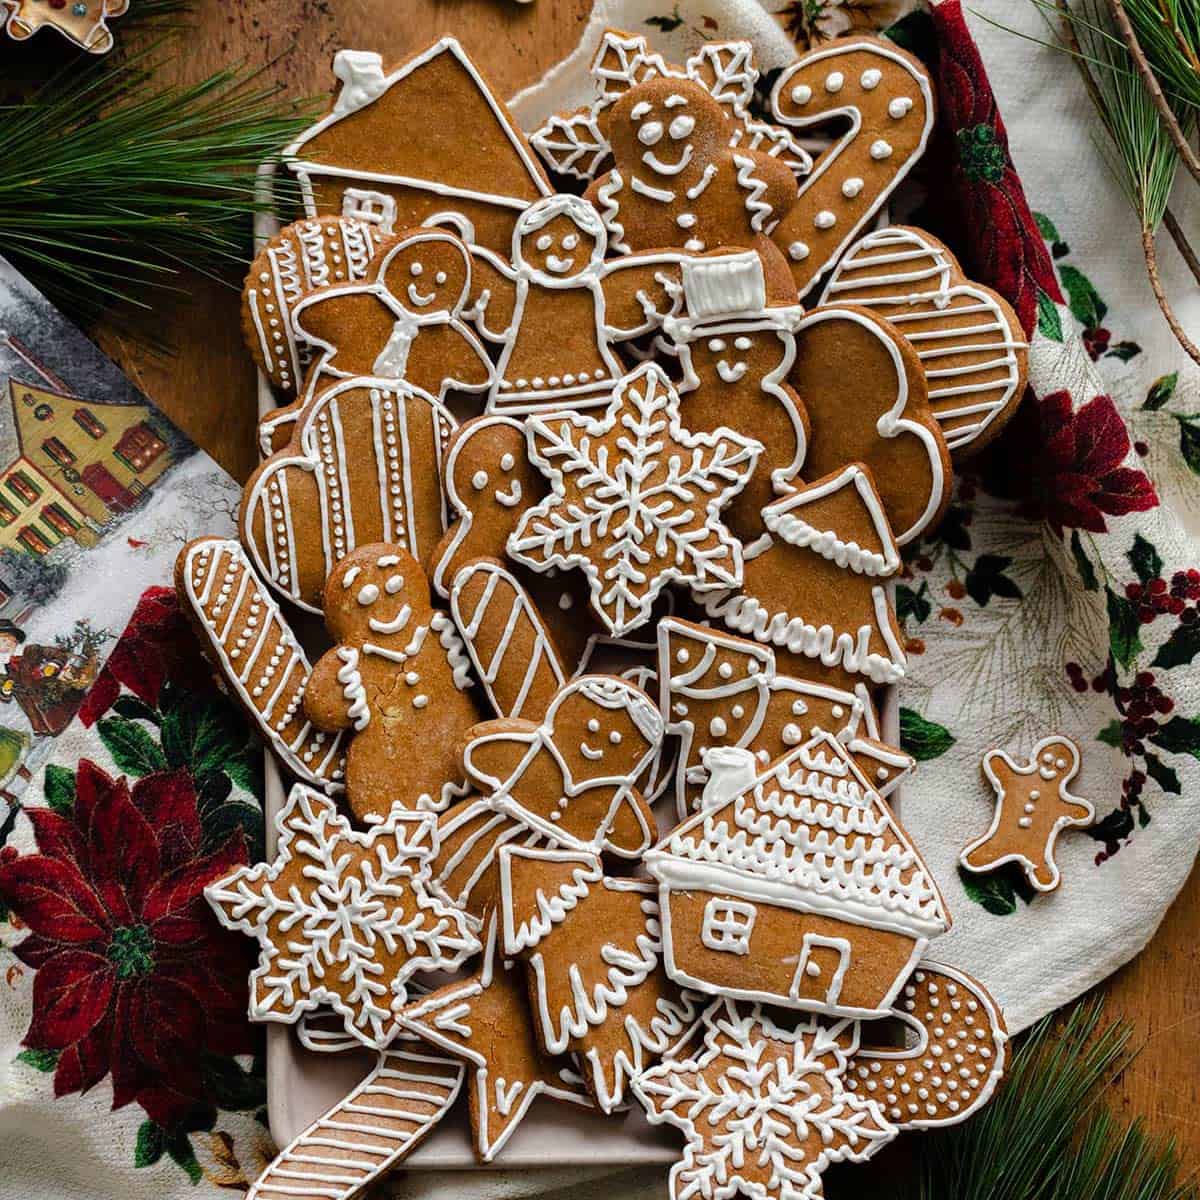 A bunch of gingerbread cookies.